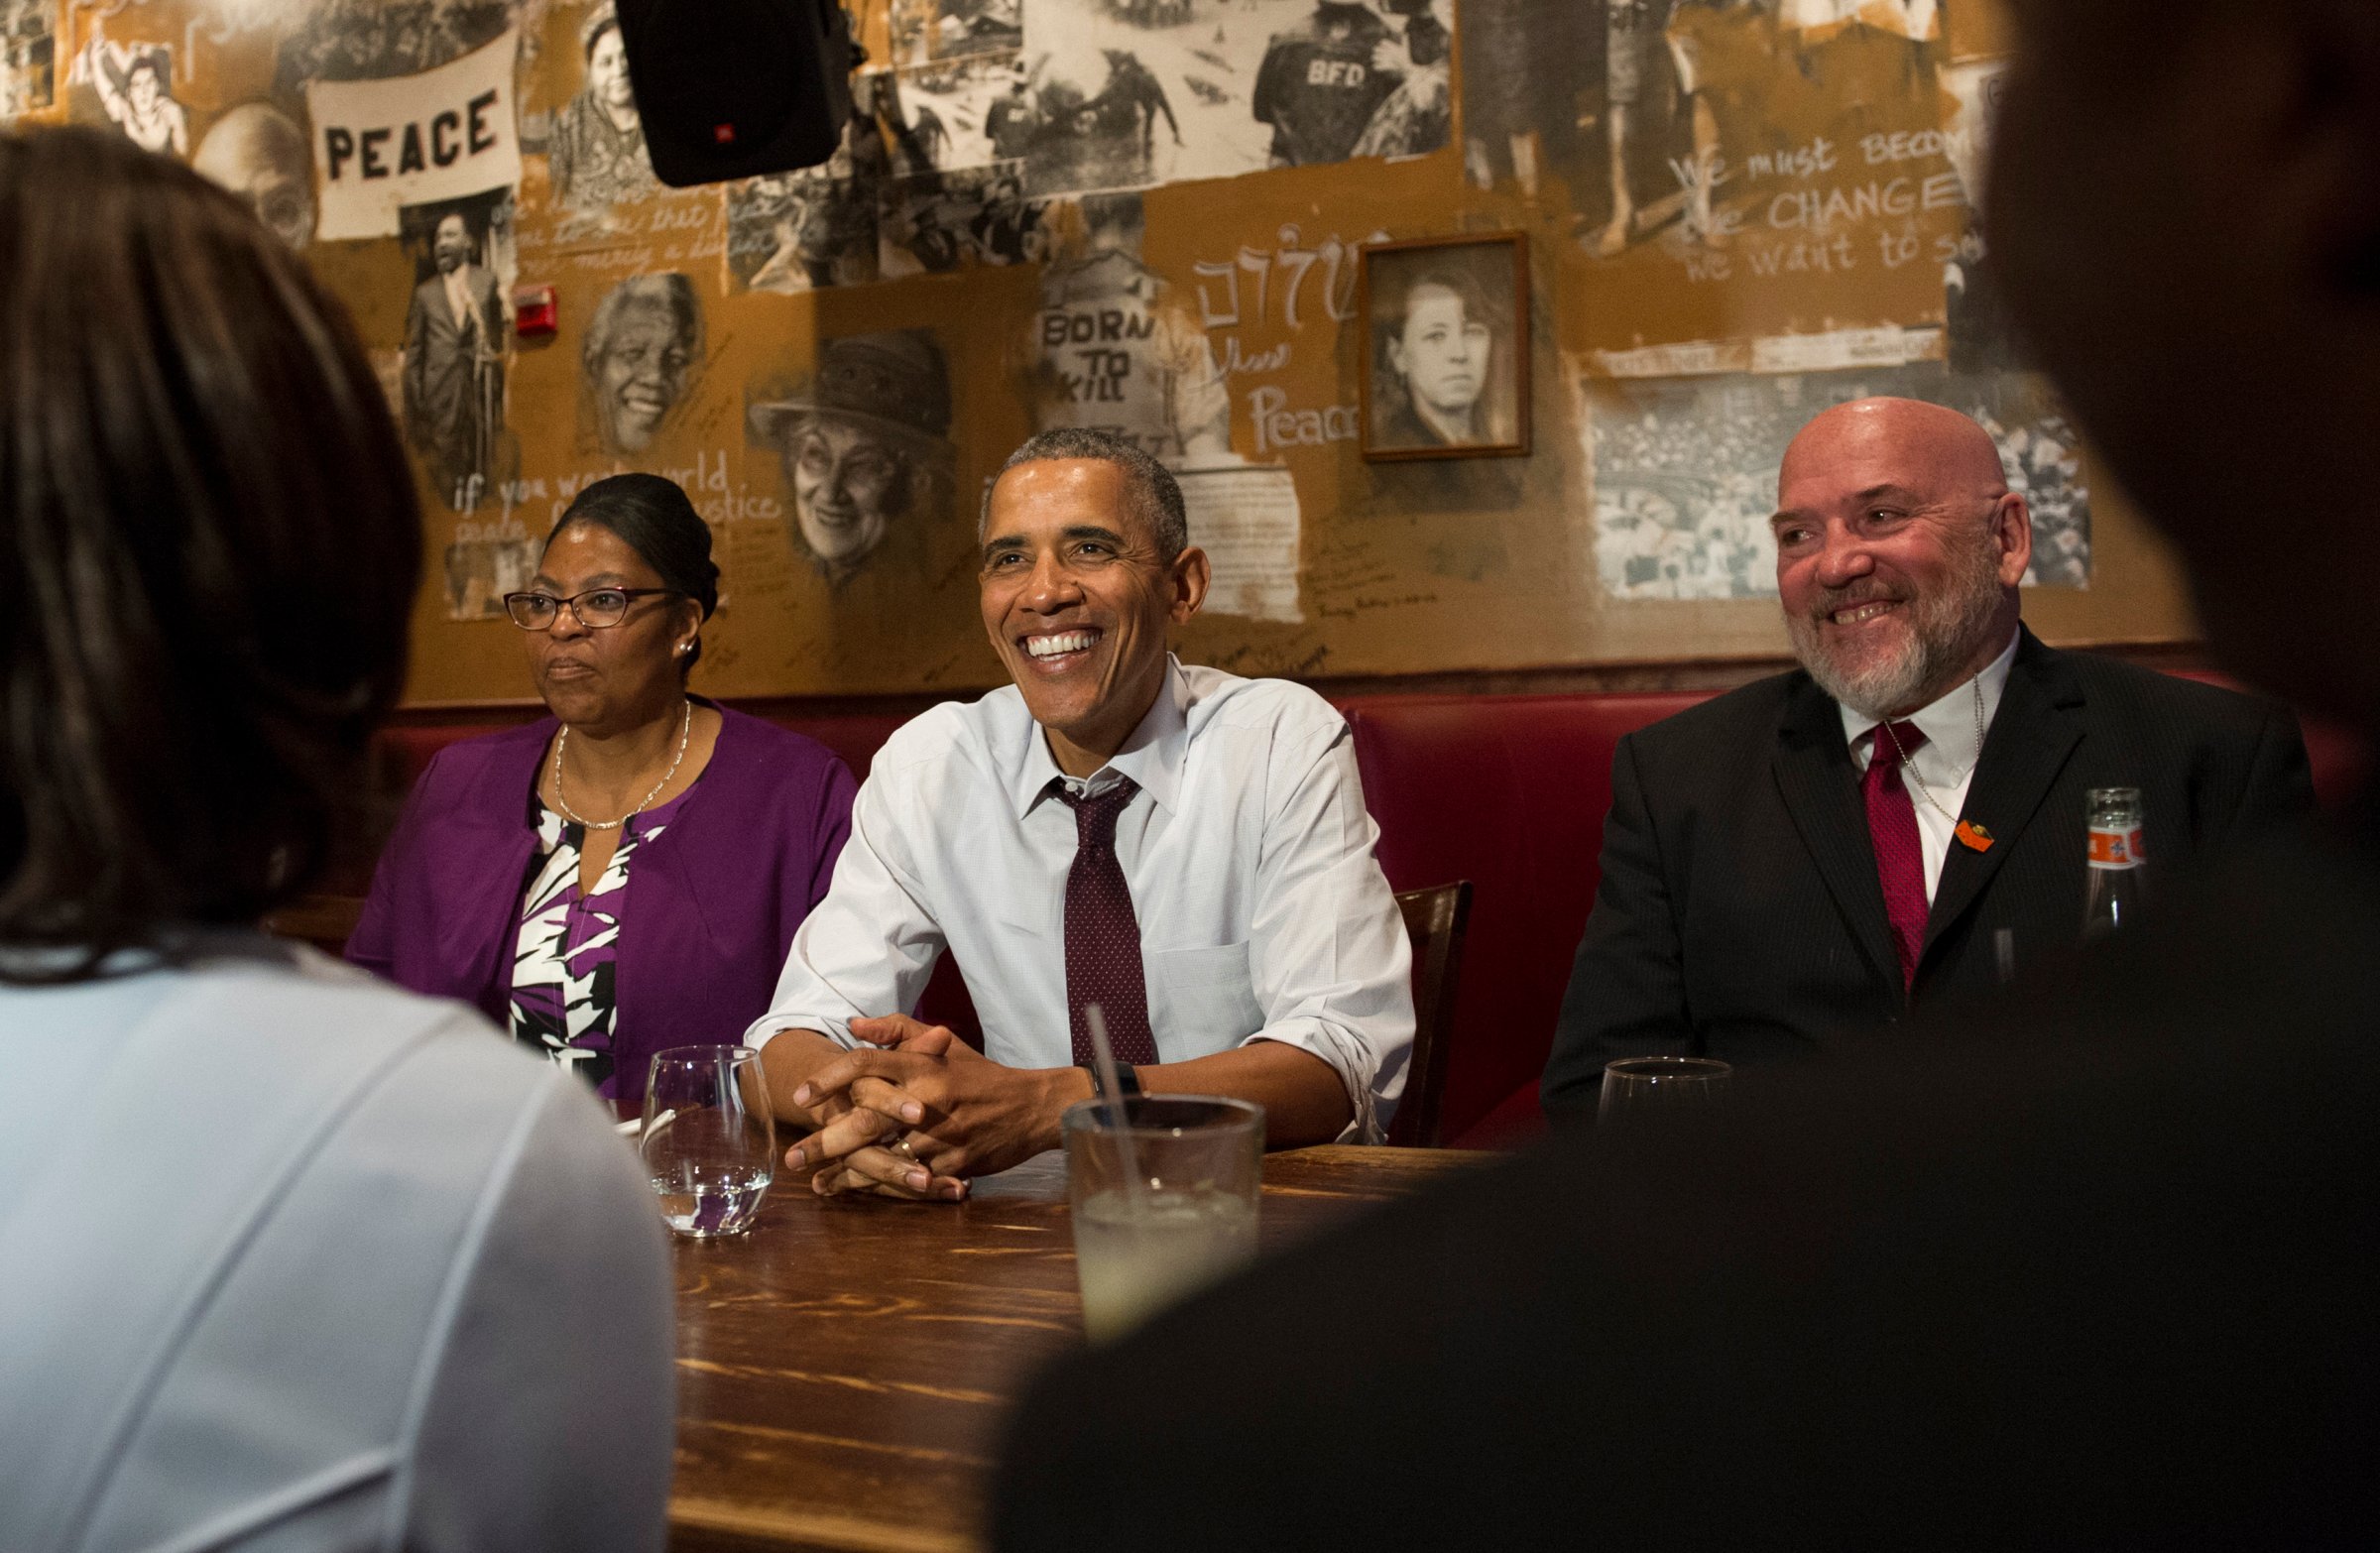 President Obama Meets With Formerly Incarcerated Individuals in Washington, D.C.